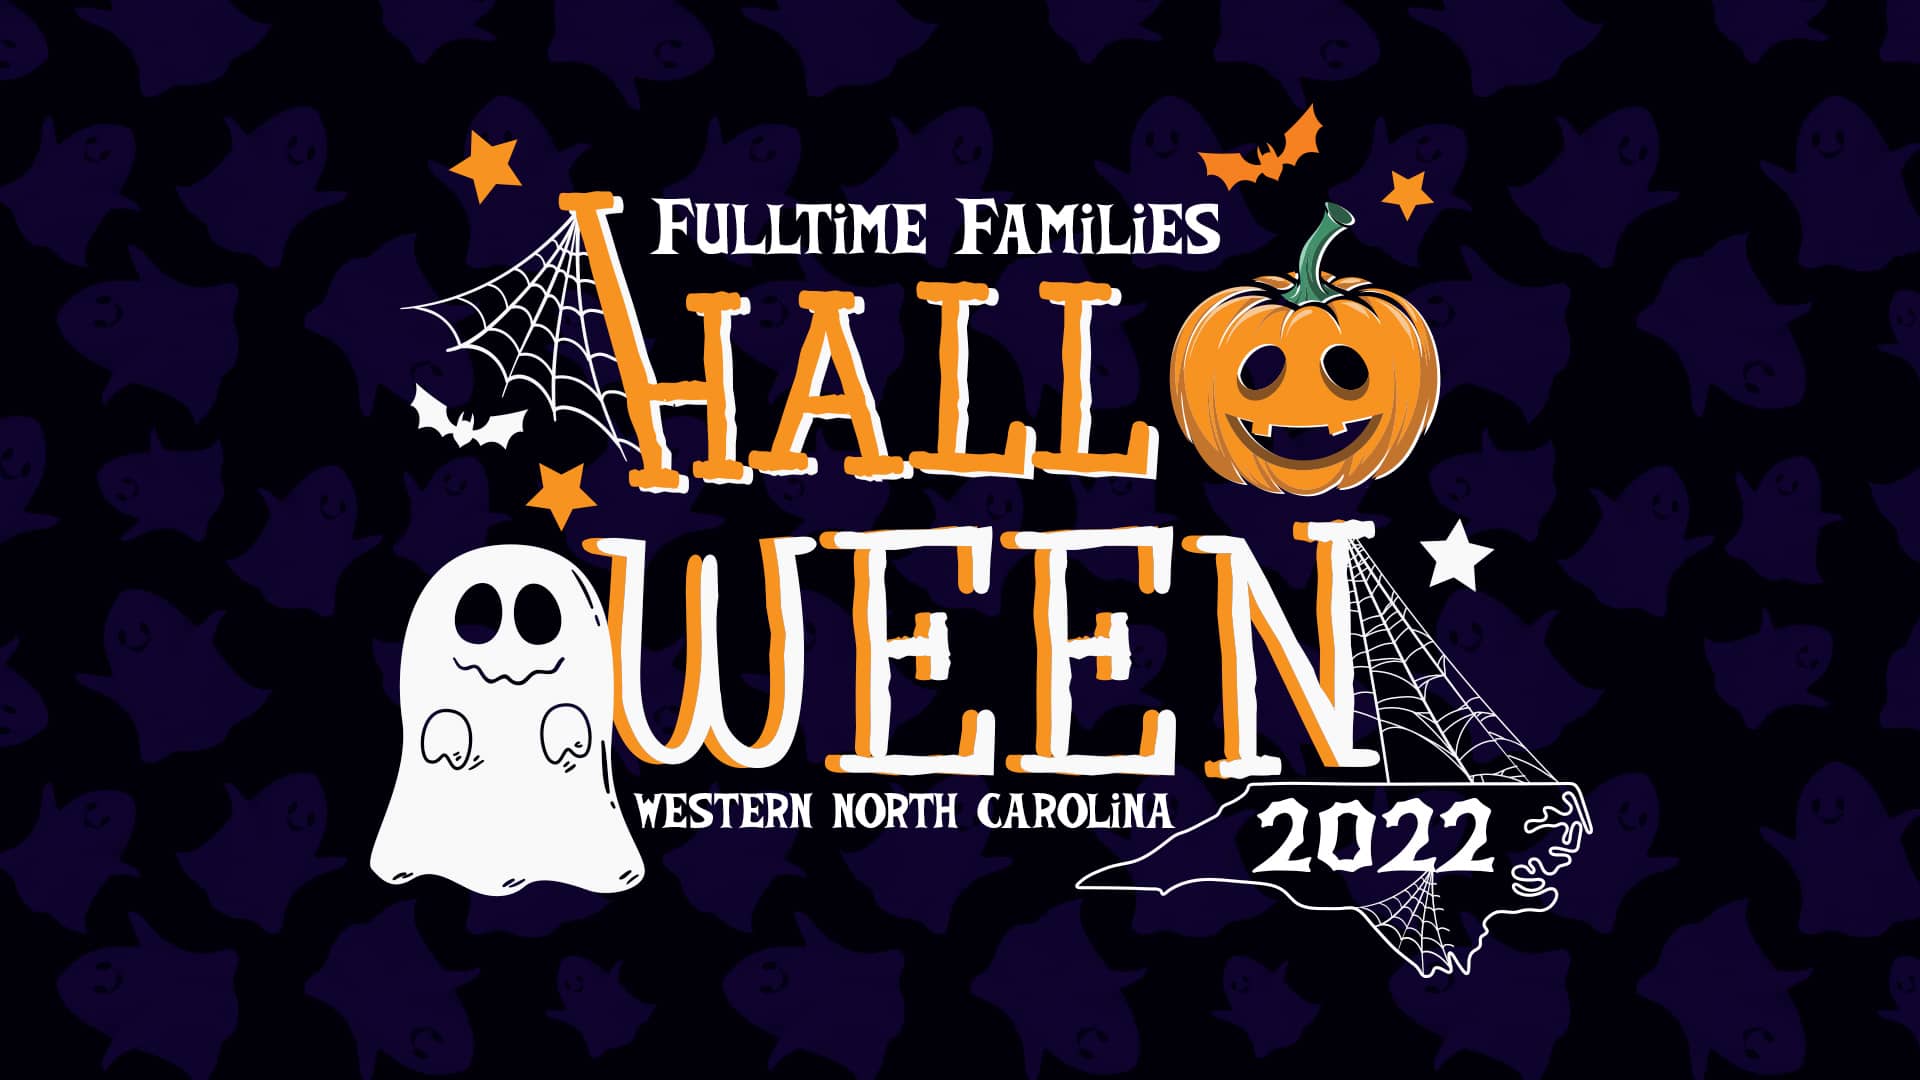 Halloween Event for Fulltime Families